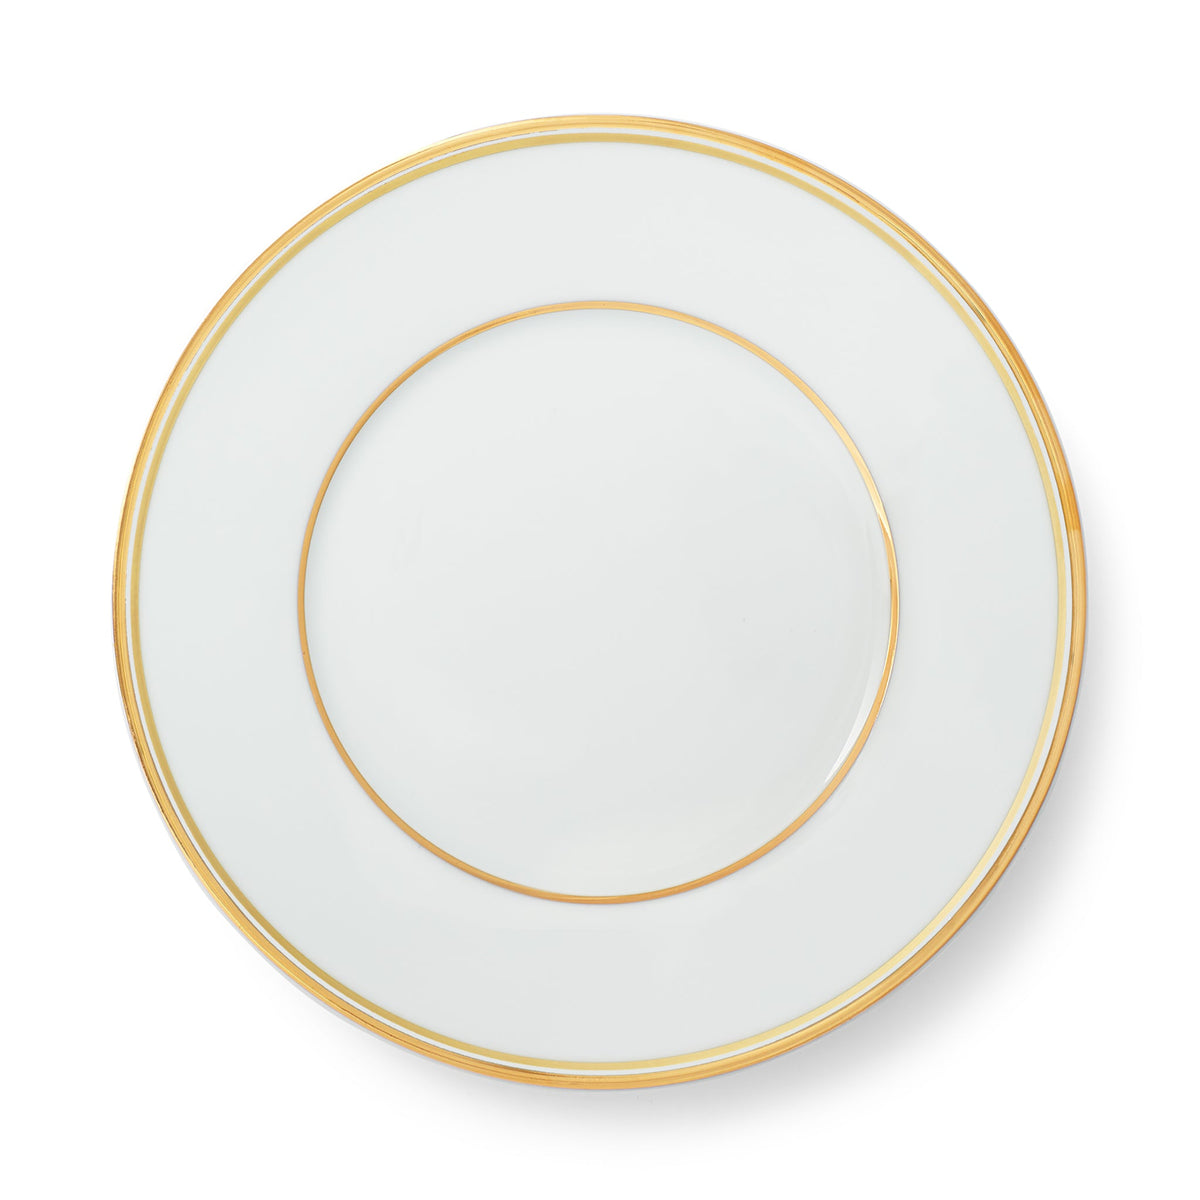 WILSHIRE SALAD PLATE GOLD